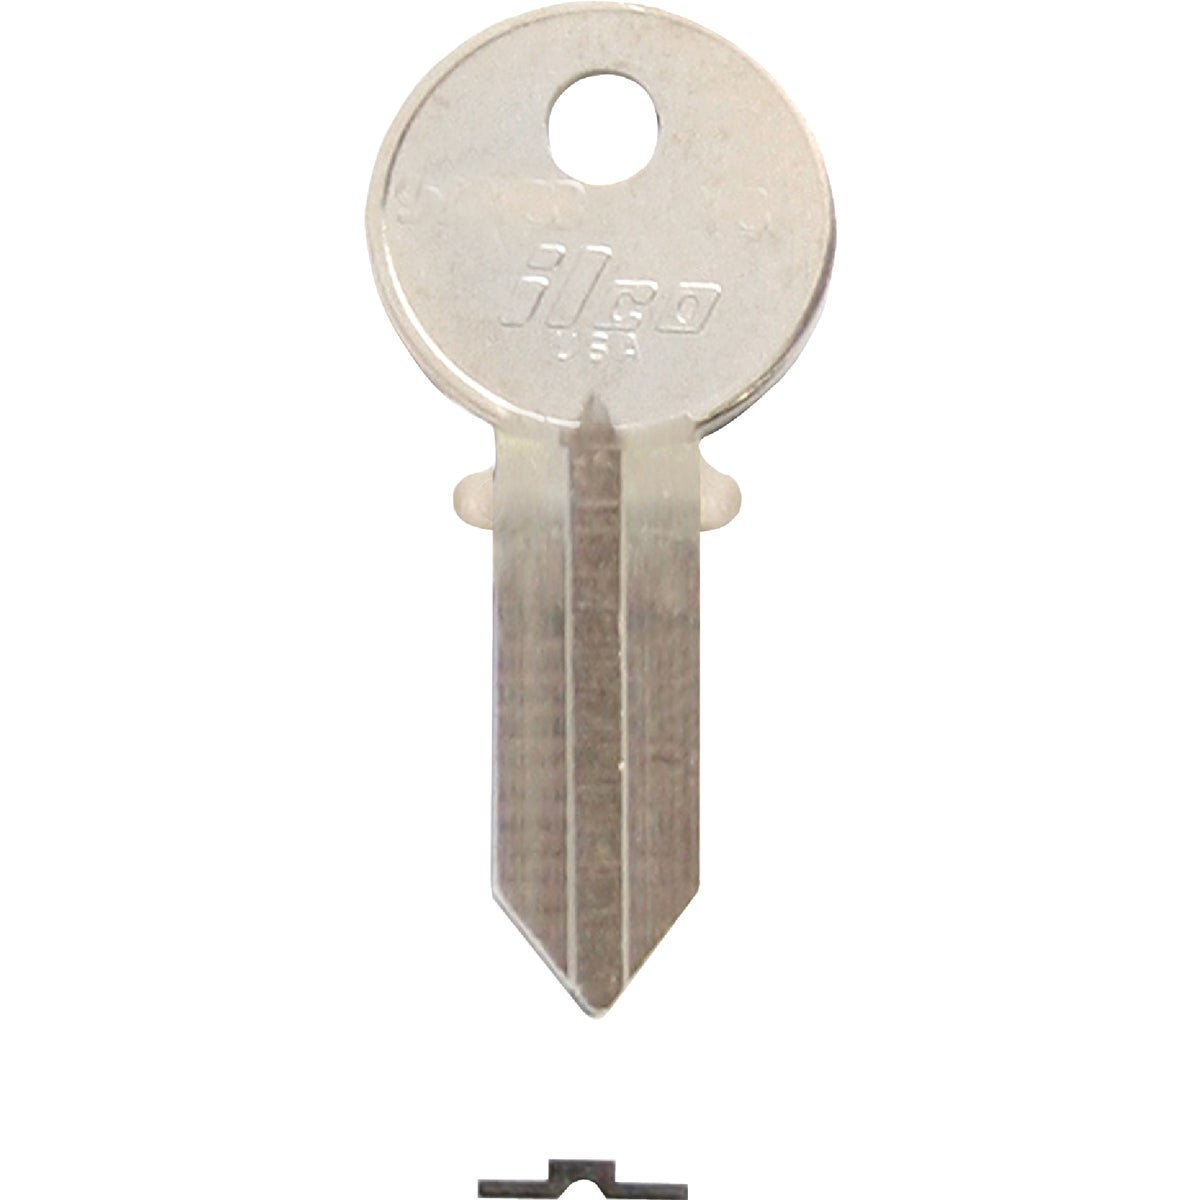 Item 212229, Nickel-plated key blank. When you order one, you will receive 10 keys.